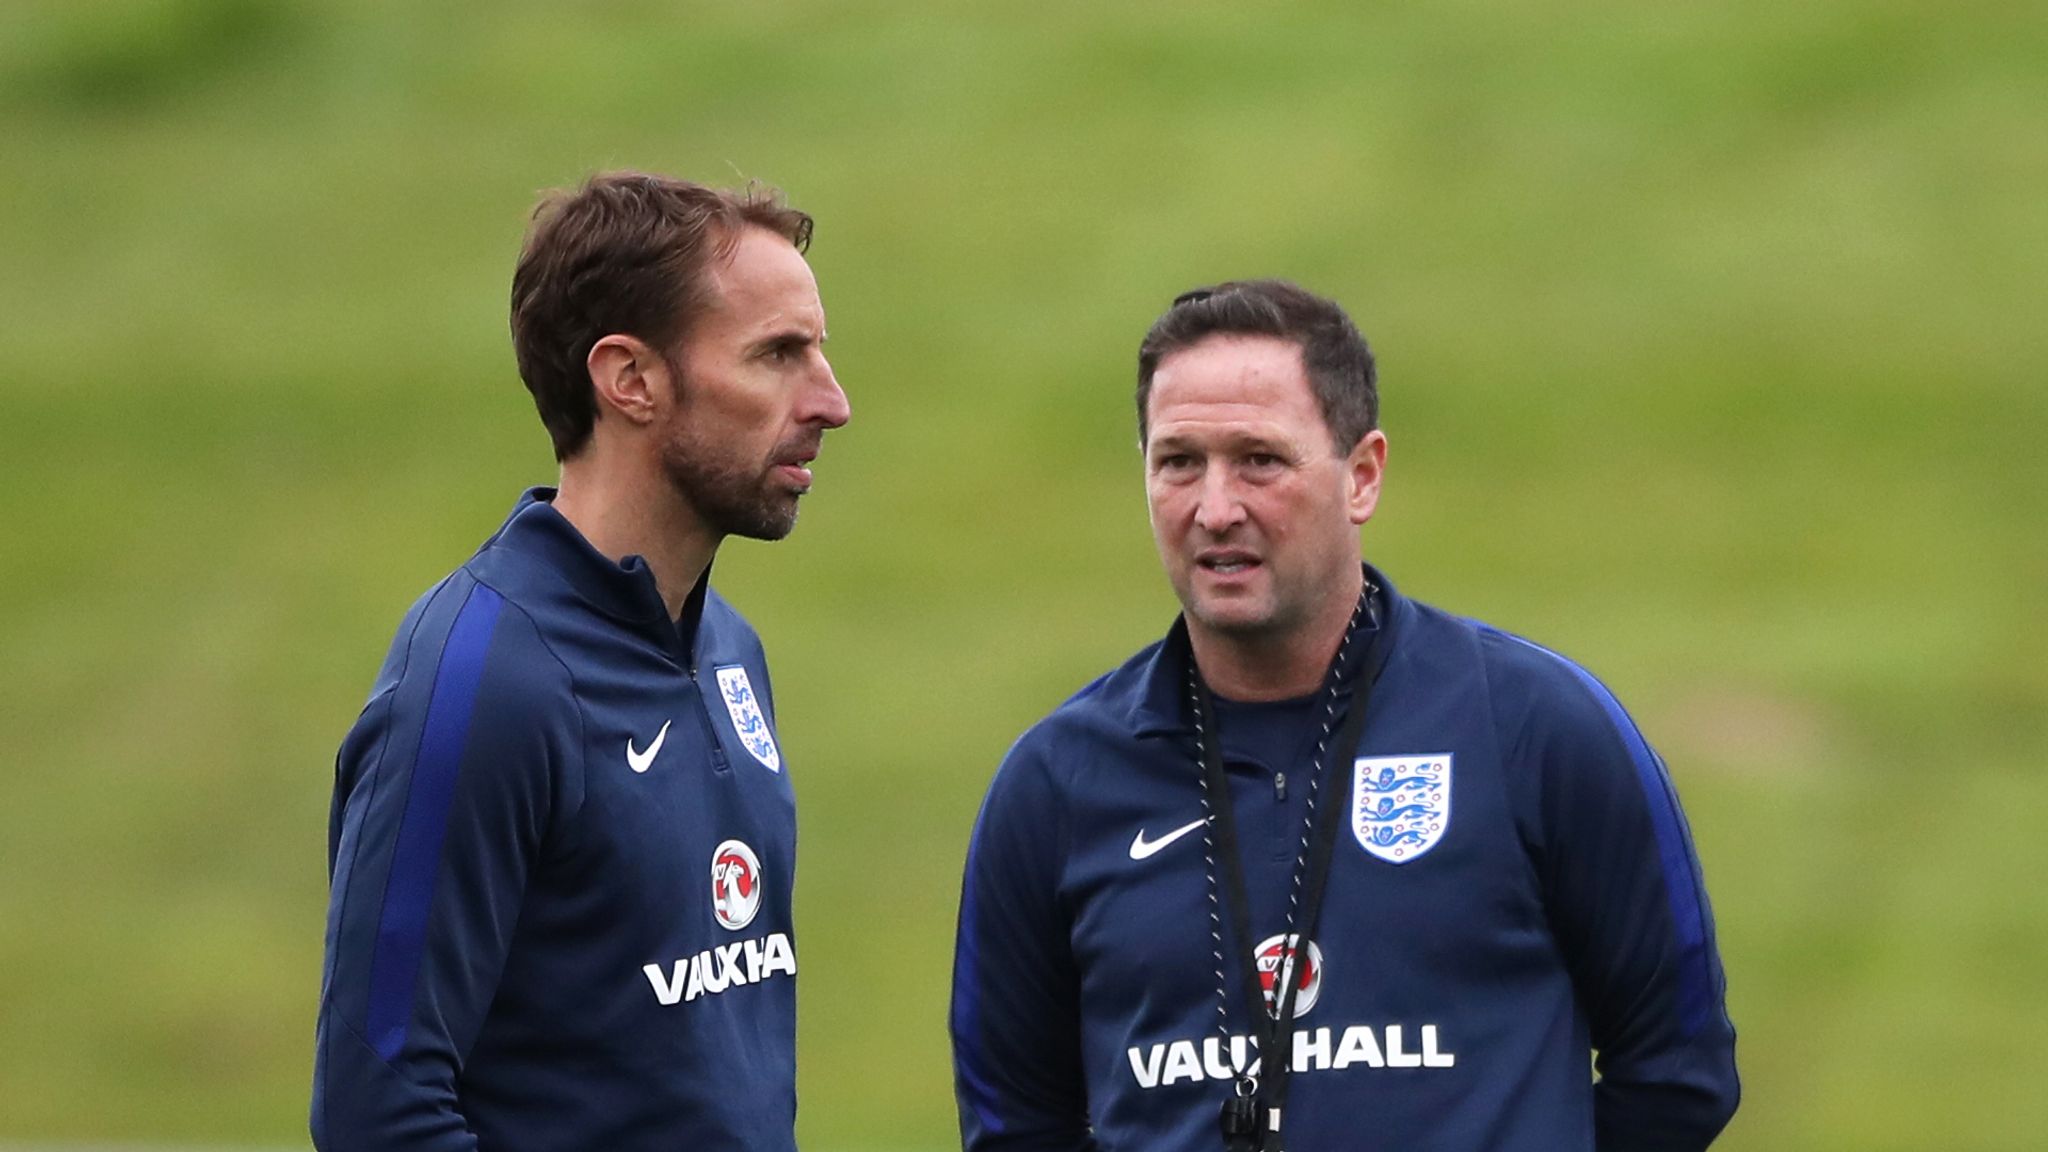 All England players involved in training except one ahead of World Cup game against USA